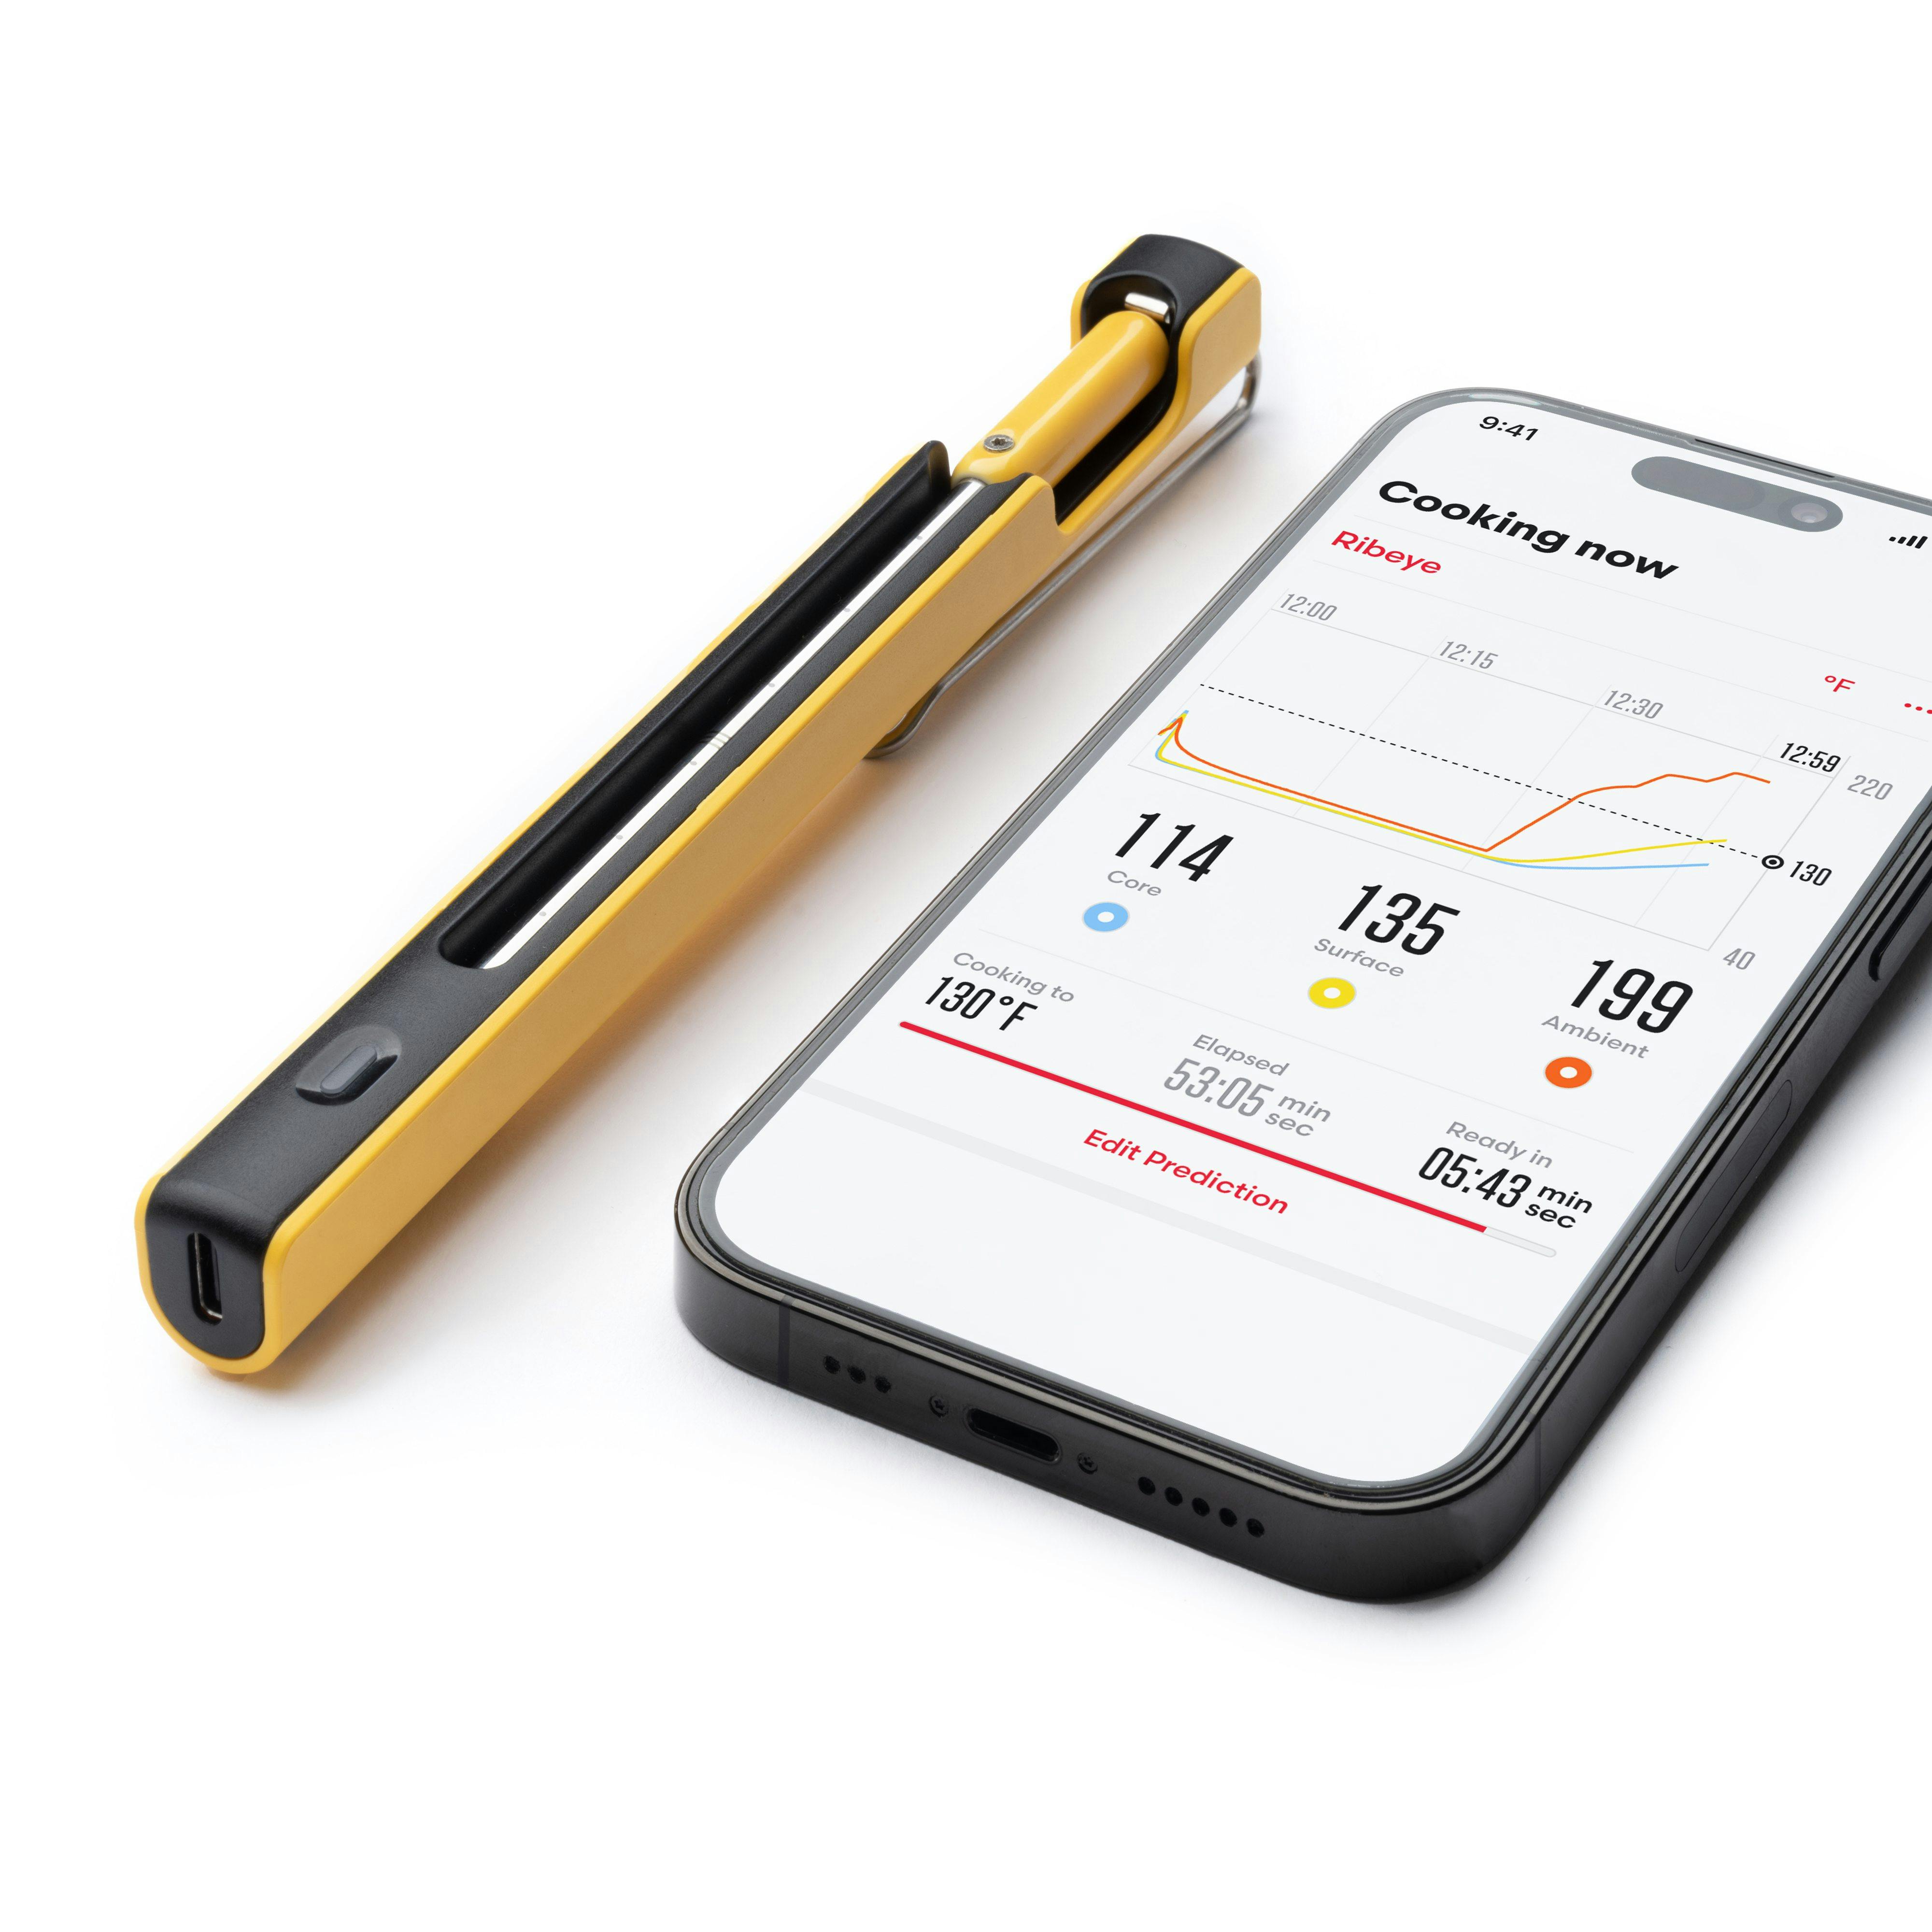 Combustion Predictive Thermometer and Display Review: Stress-Free